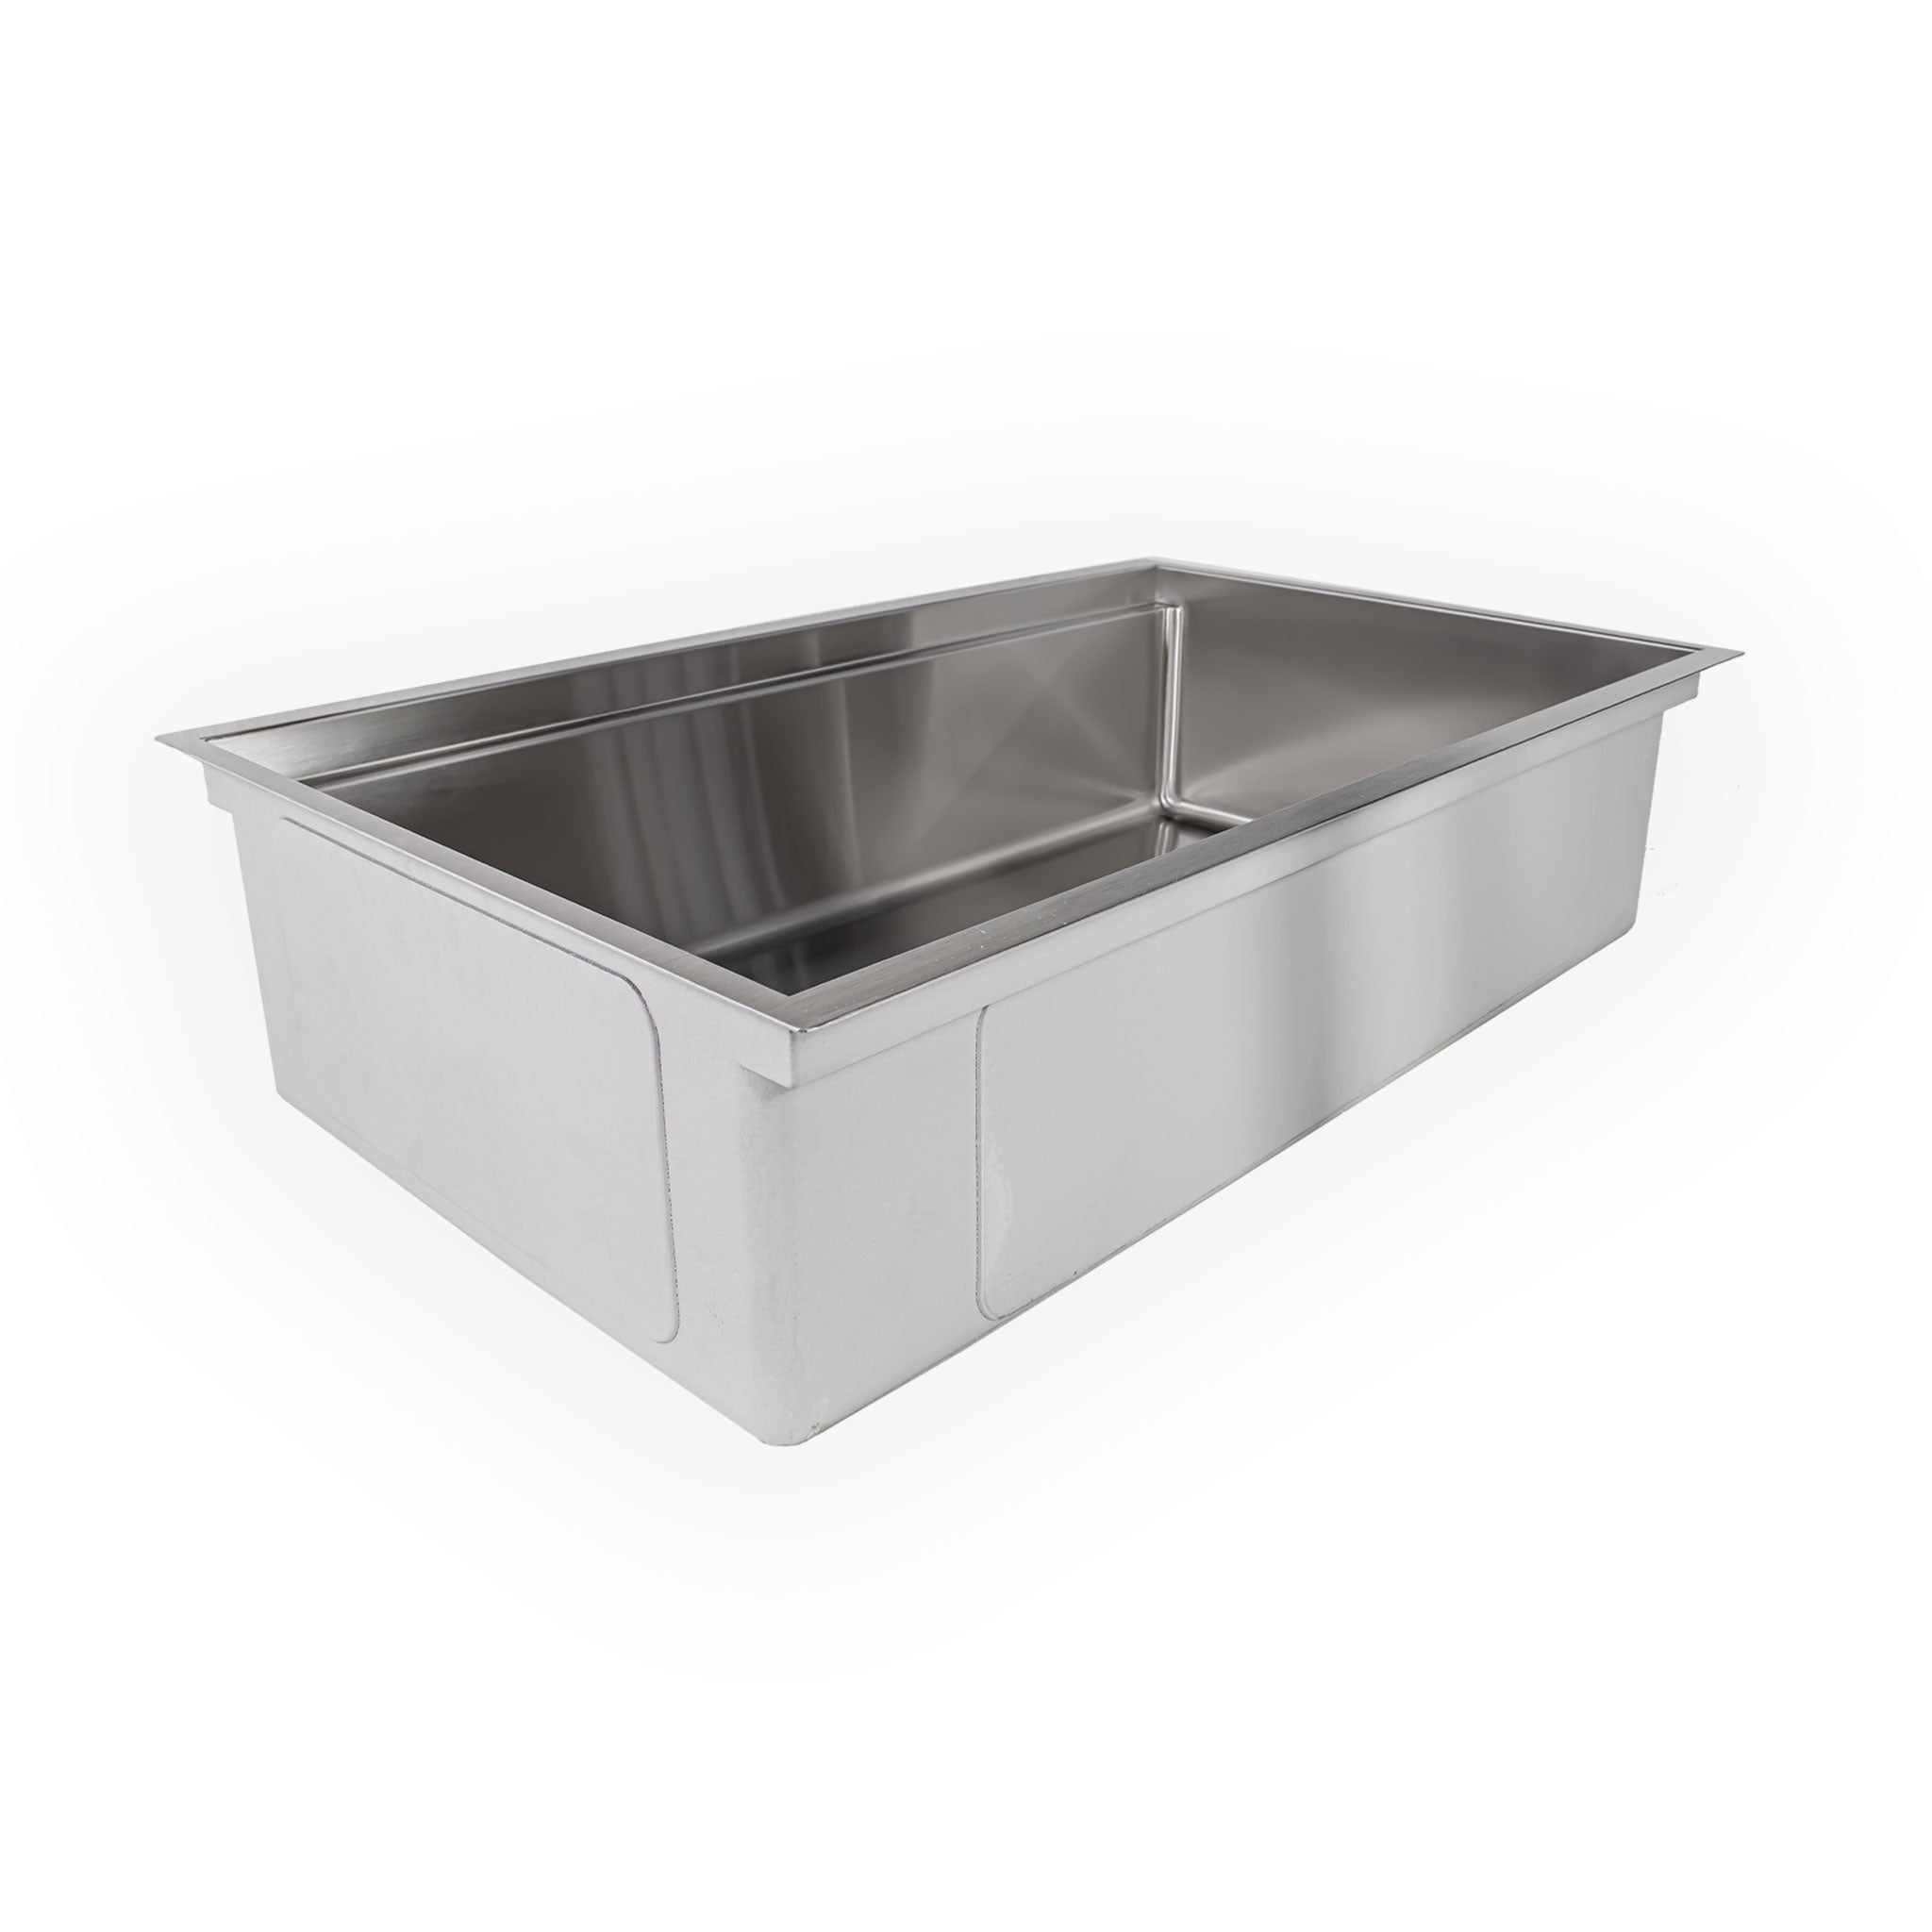 Exterior view of a 31” workstation sink from Create Good Sinks.